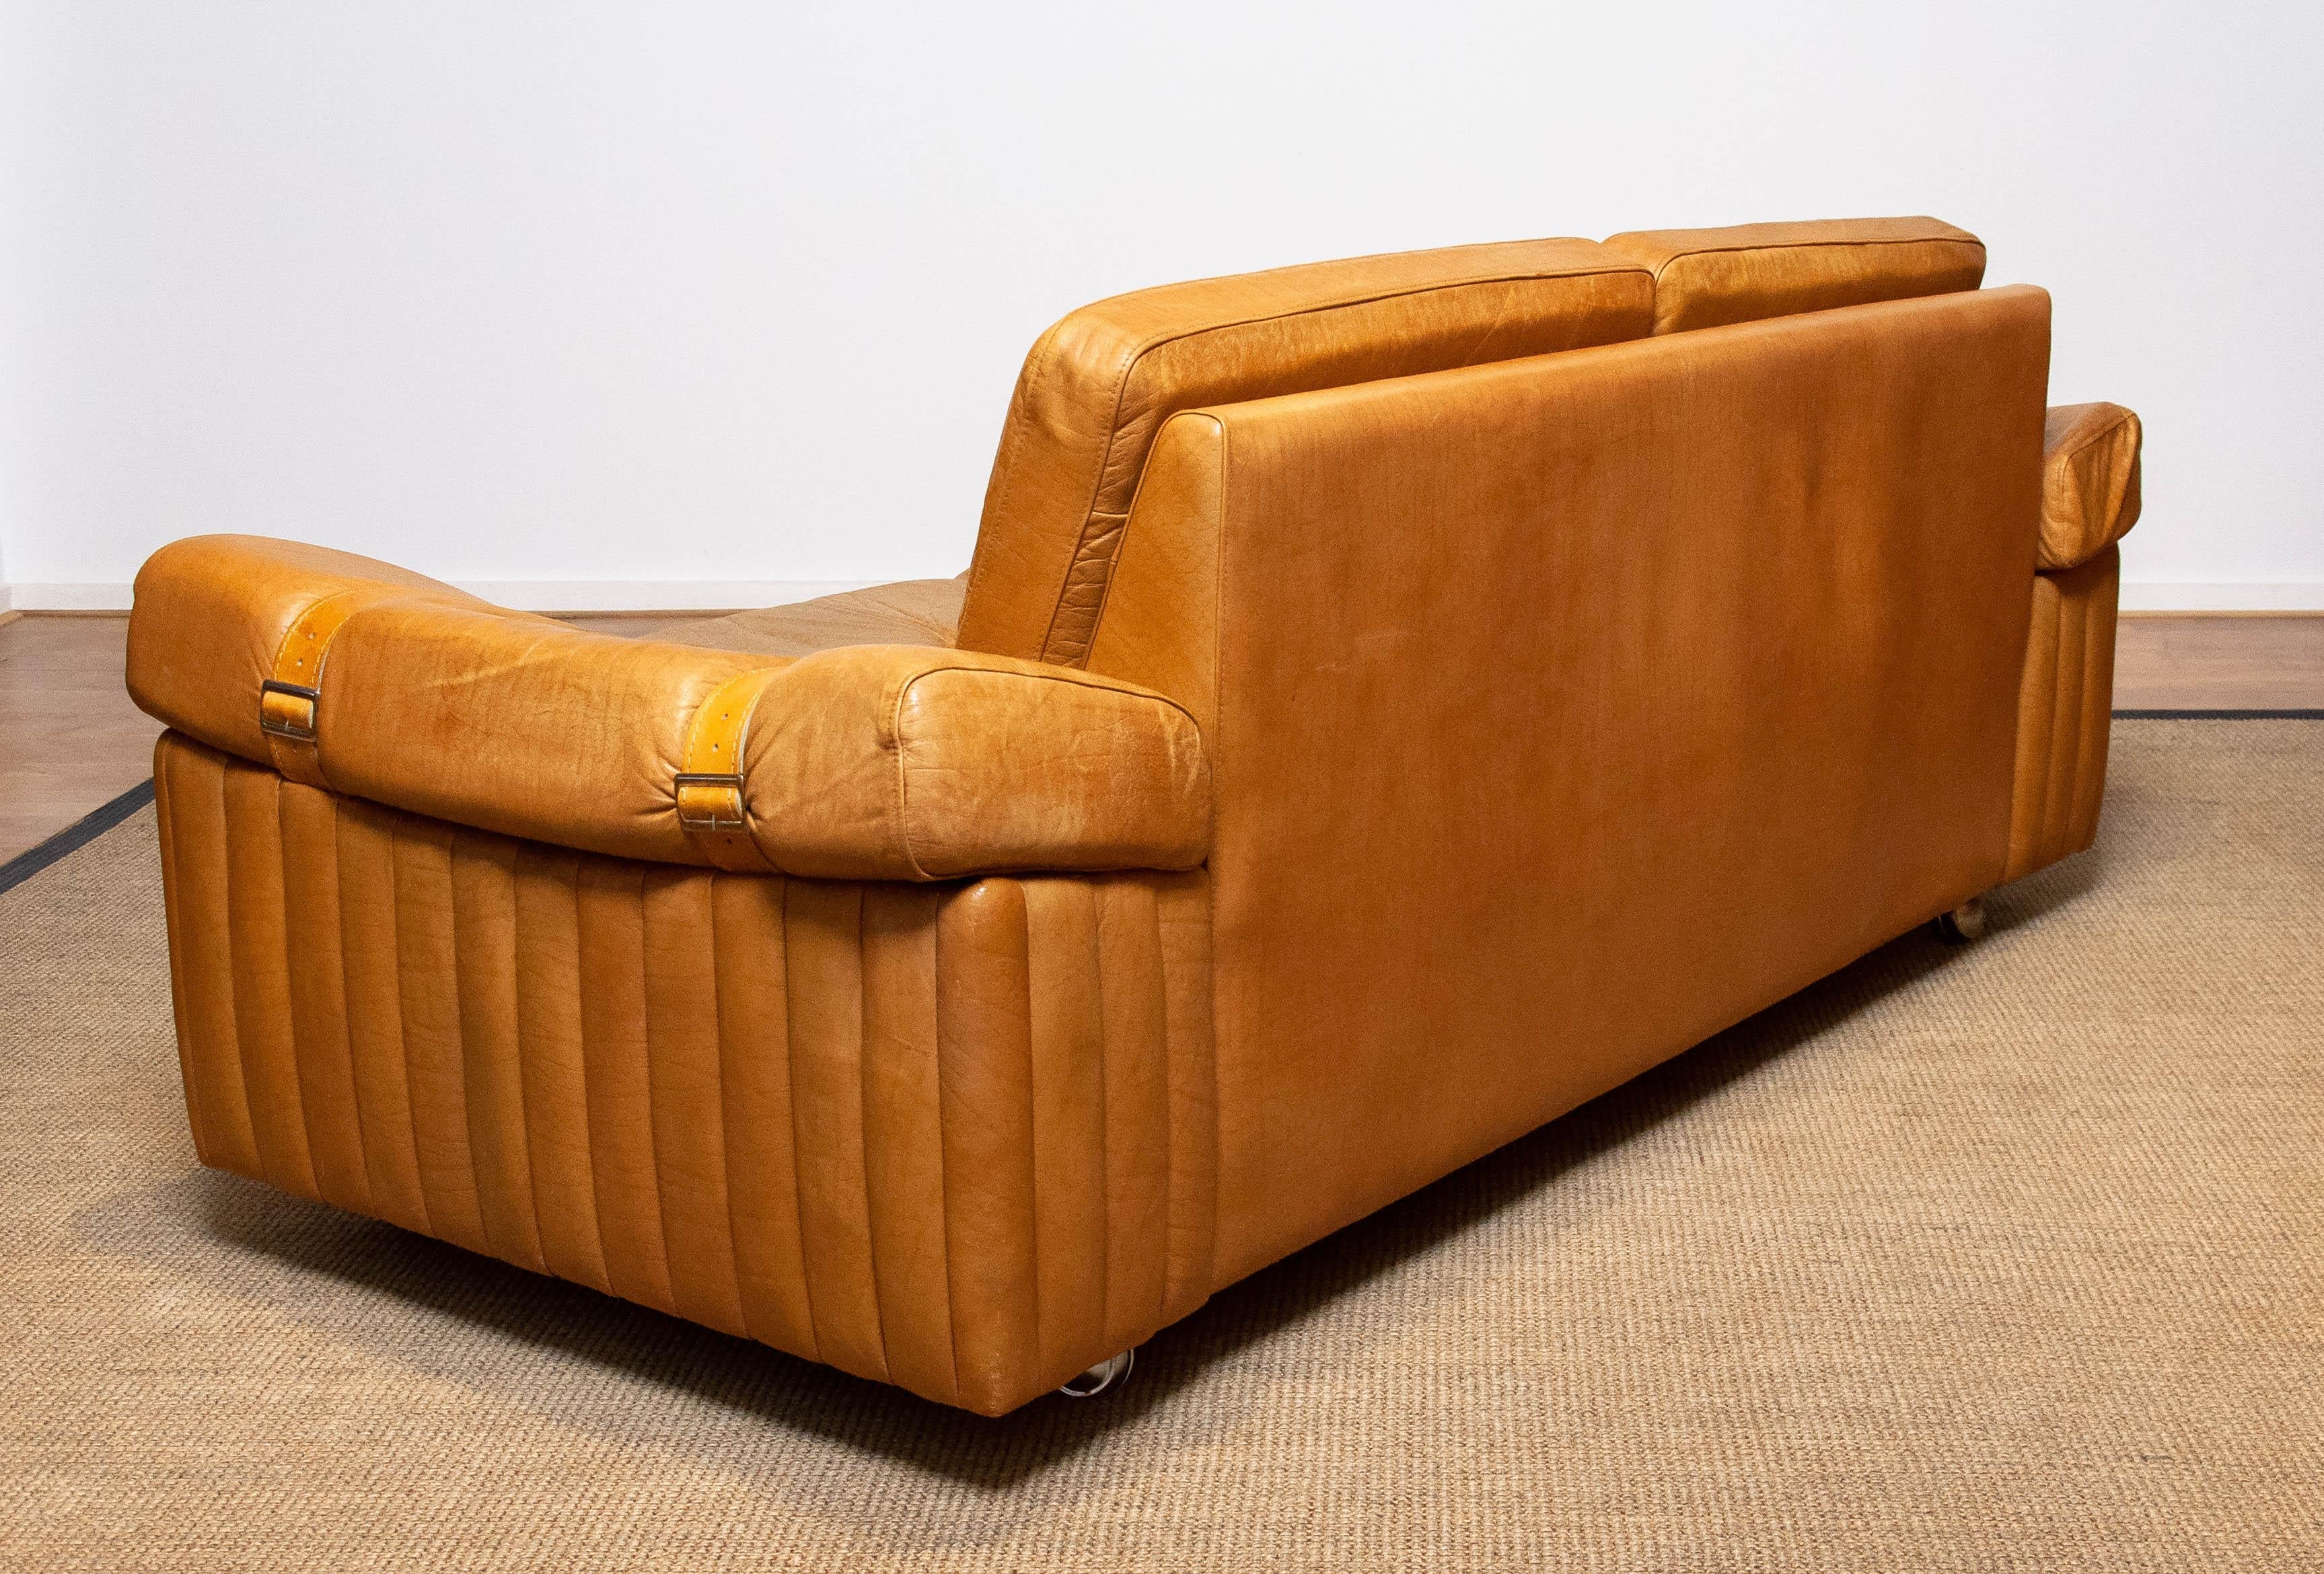 1970s Scandinavian Brutalist Two-Seater Low-Back Sofa in Camel Colored Leather In Good Condition For Sale In Silvolde, Gelderland